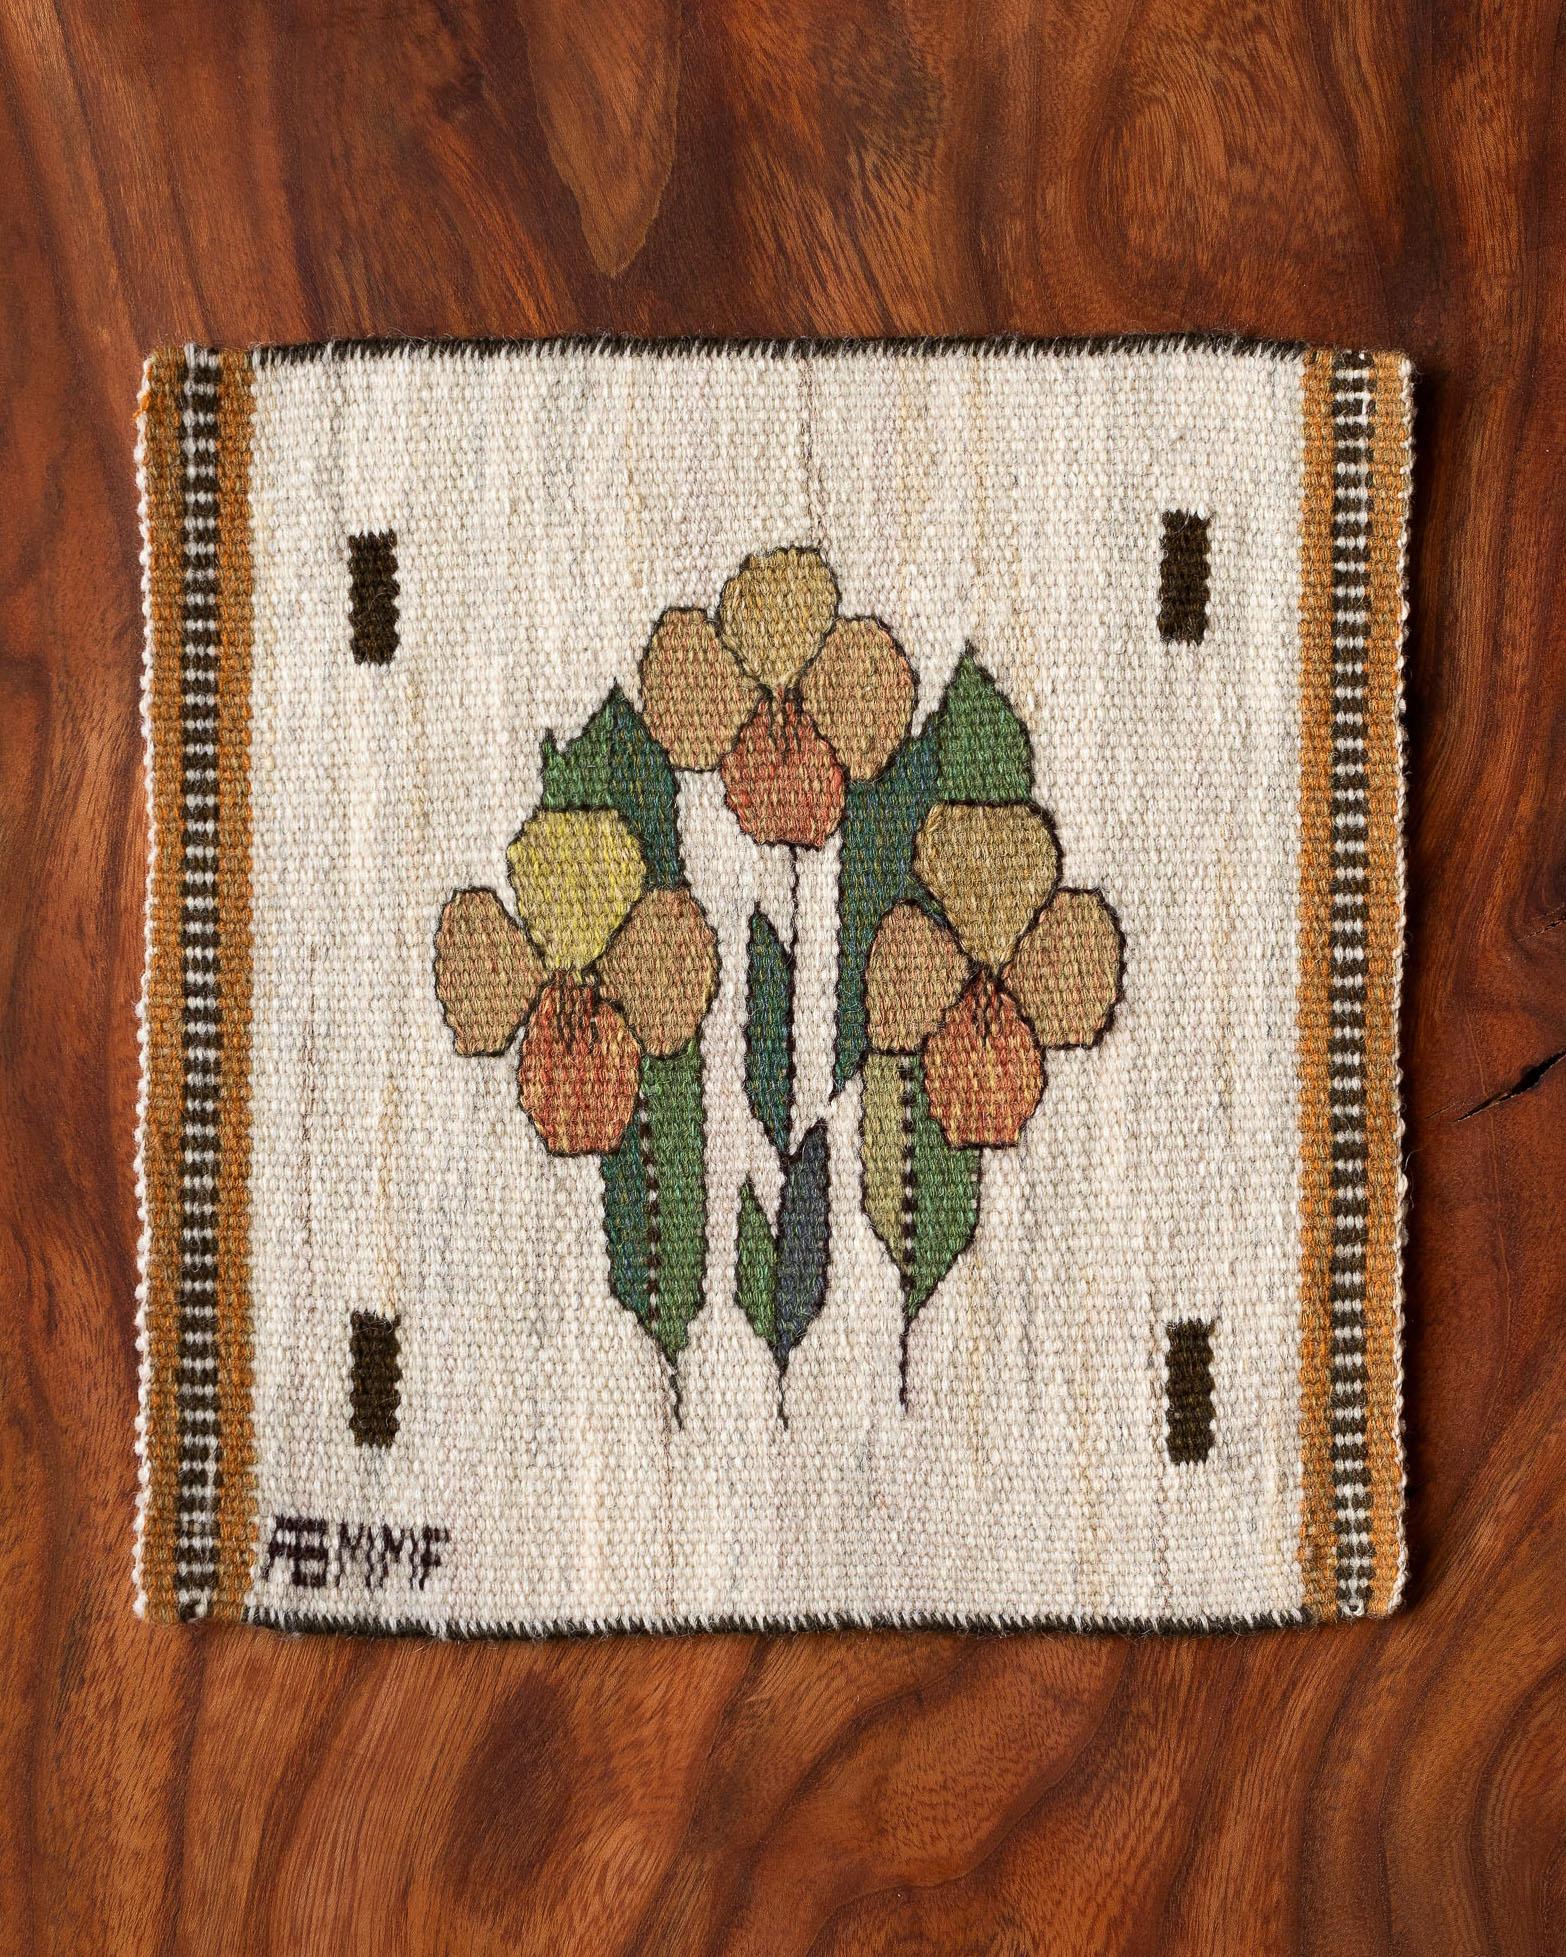 Handwoven tapestry with pansies, designed by Märta Måås-Fjetterström in 1939. 

Woven in wool on a wool warp and at the Märta Måås-Fjetterström studio in Båstad, Sweden. 

The tapestry can be framed, mounted as a decorative pillow, or used on a